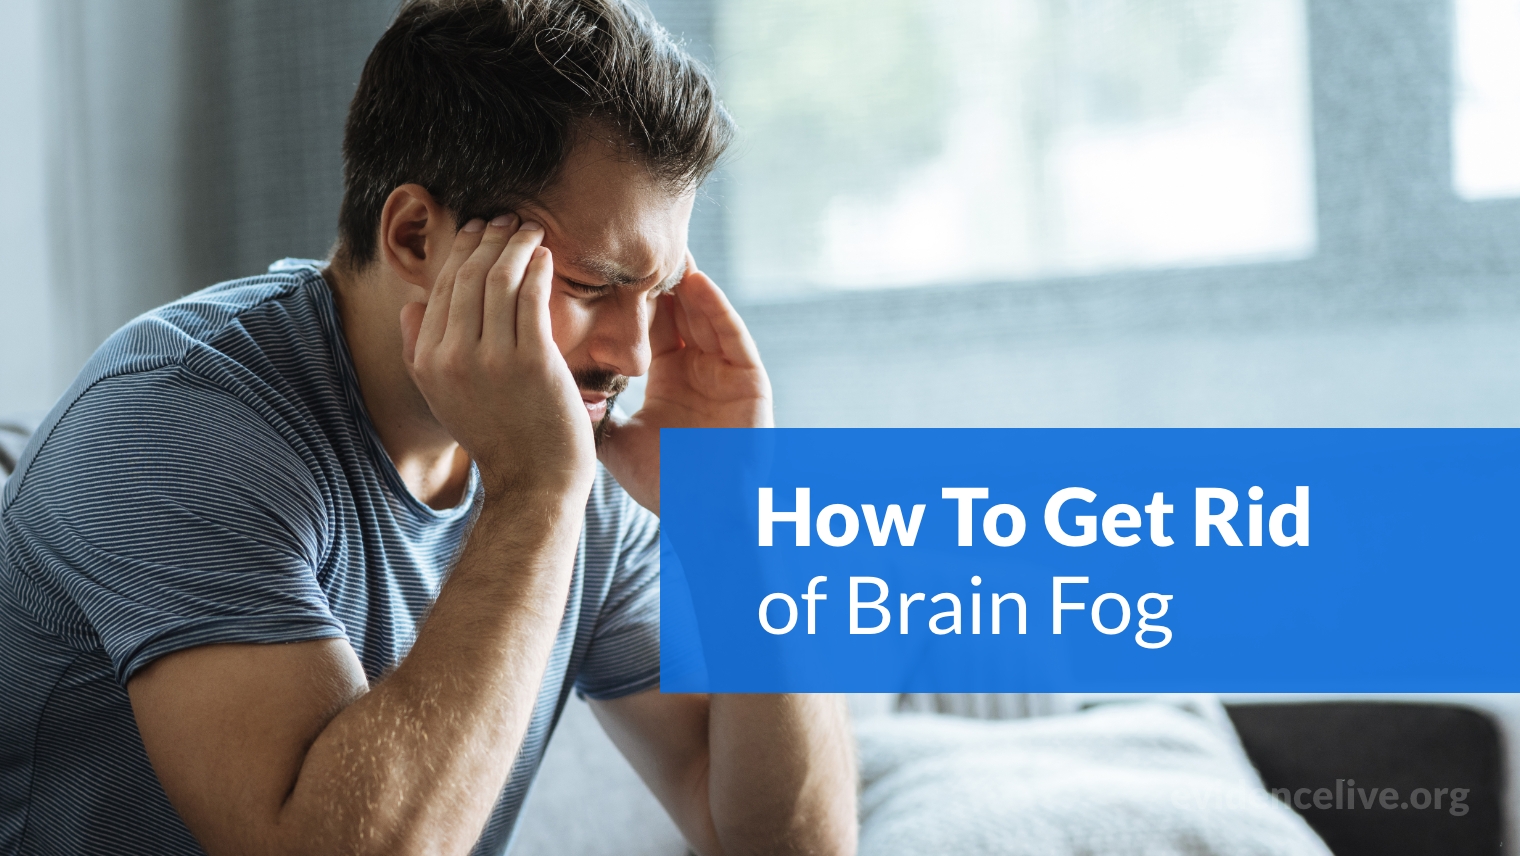 How To Get Rid of Brain Fog (Natural Remedies)